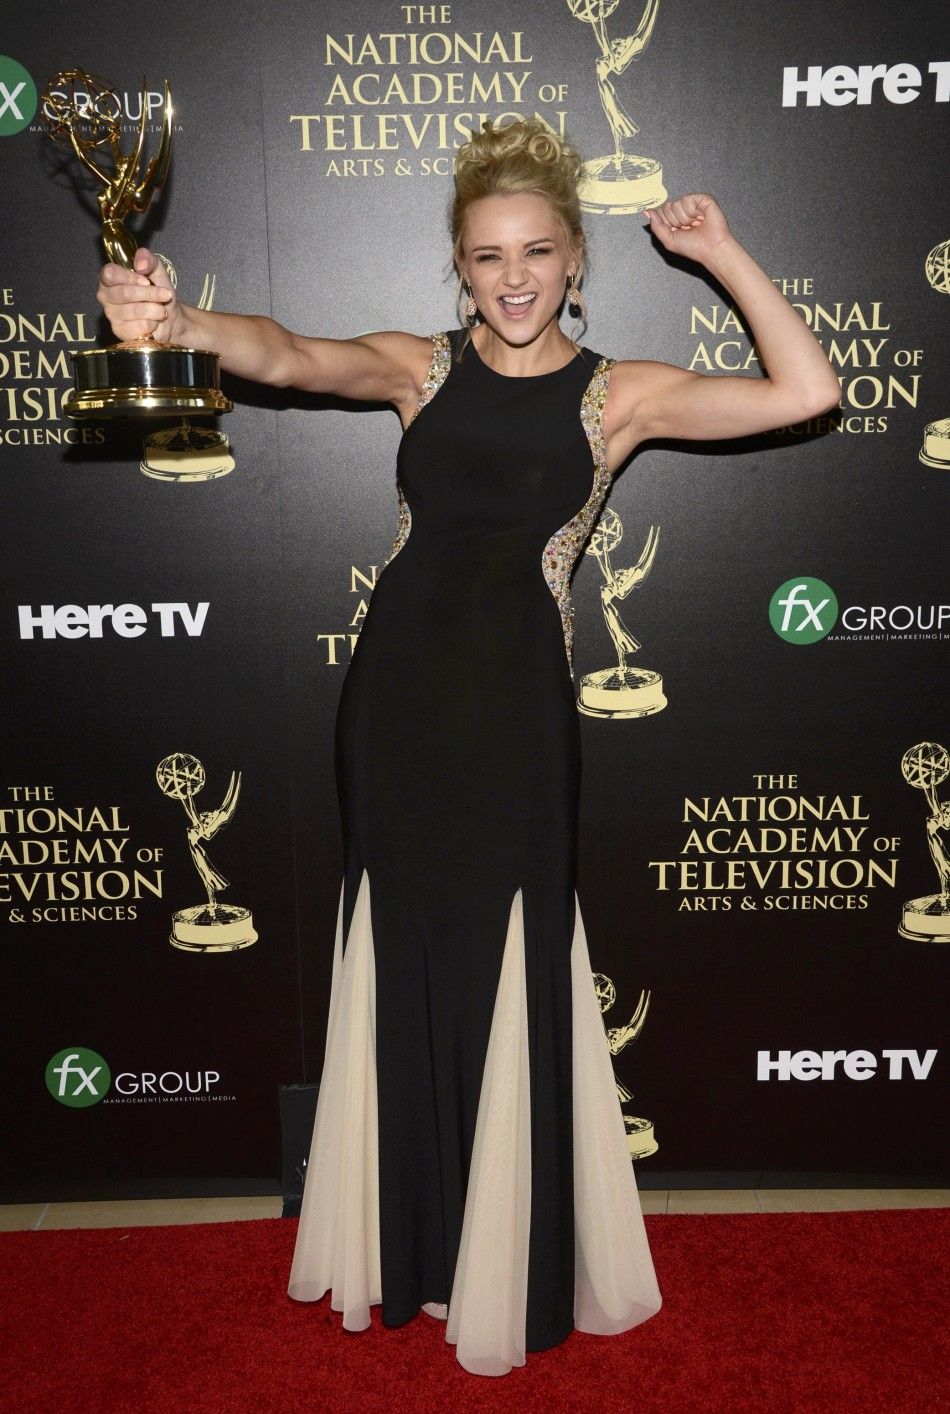 Hunter King Poses Backstage with the Award for Outstanding Younger Actress in a Drama Series for Her Role on The Young and the Restless During the 41st Annual Daytime Emmy Awards in Beverly Hills